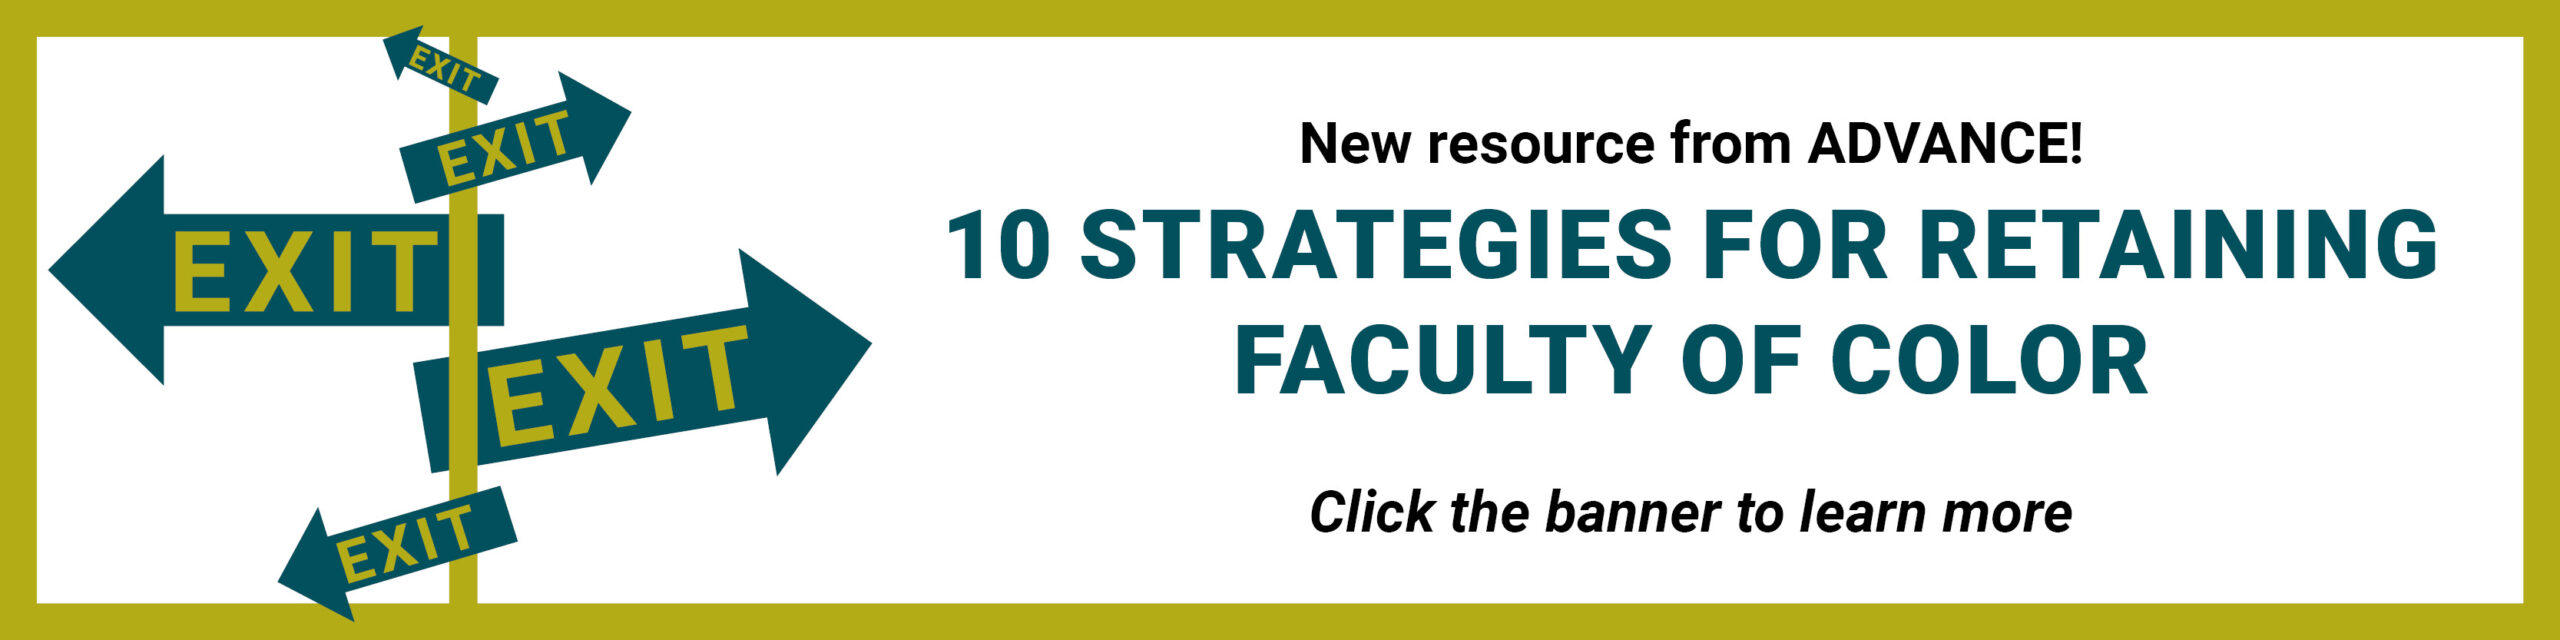 New resource from ADVANCE. 10 strategies to retain faculty of color